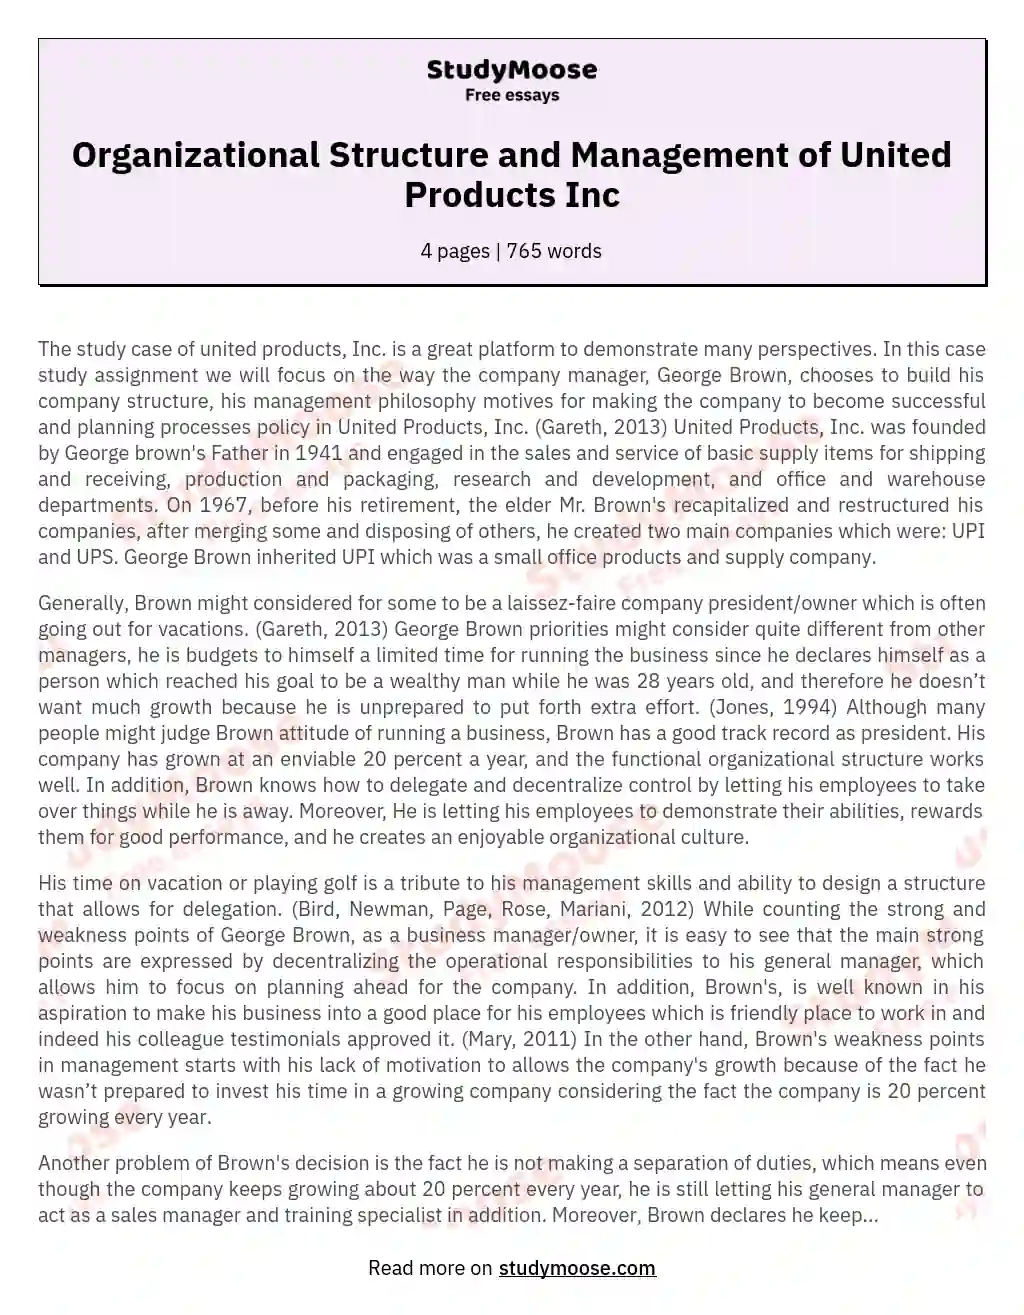 Organizational Structure and Management of United Products Inc essay